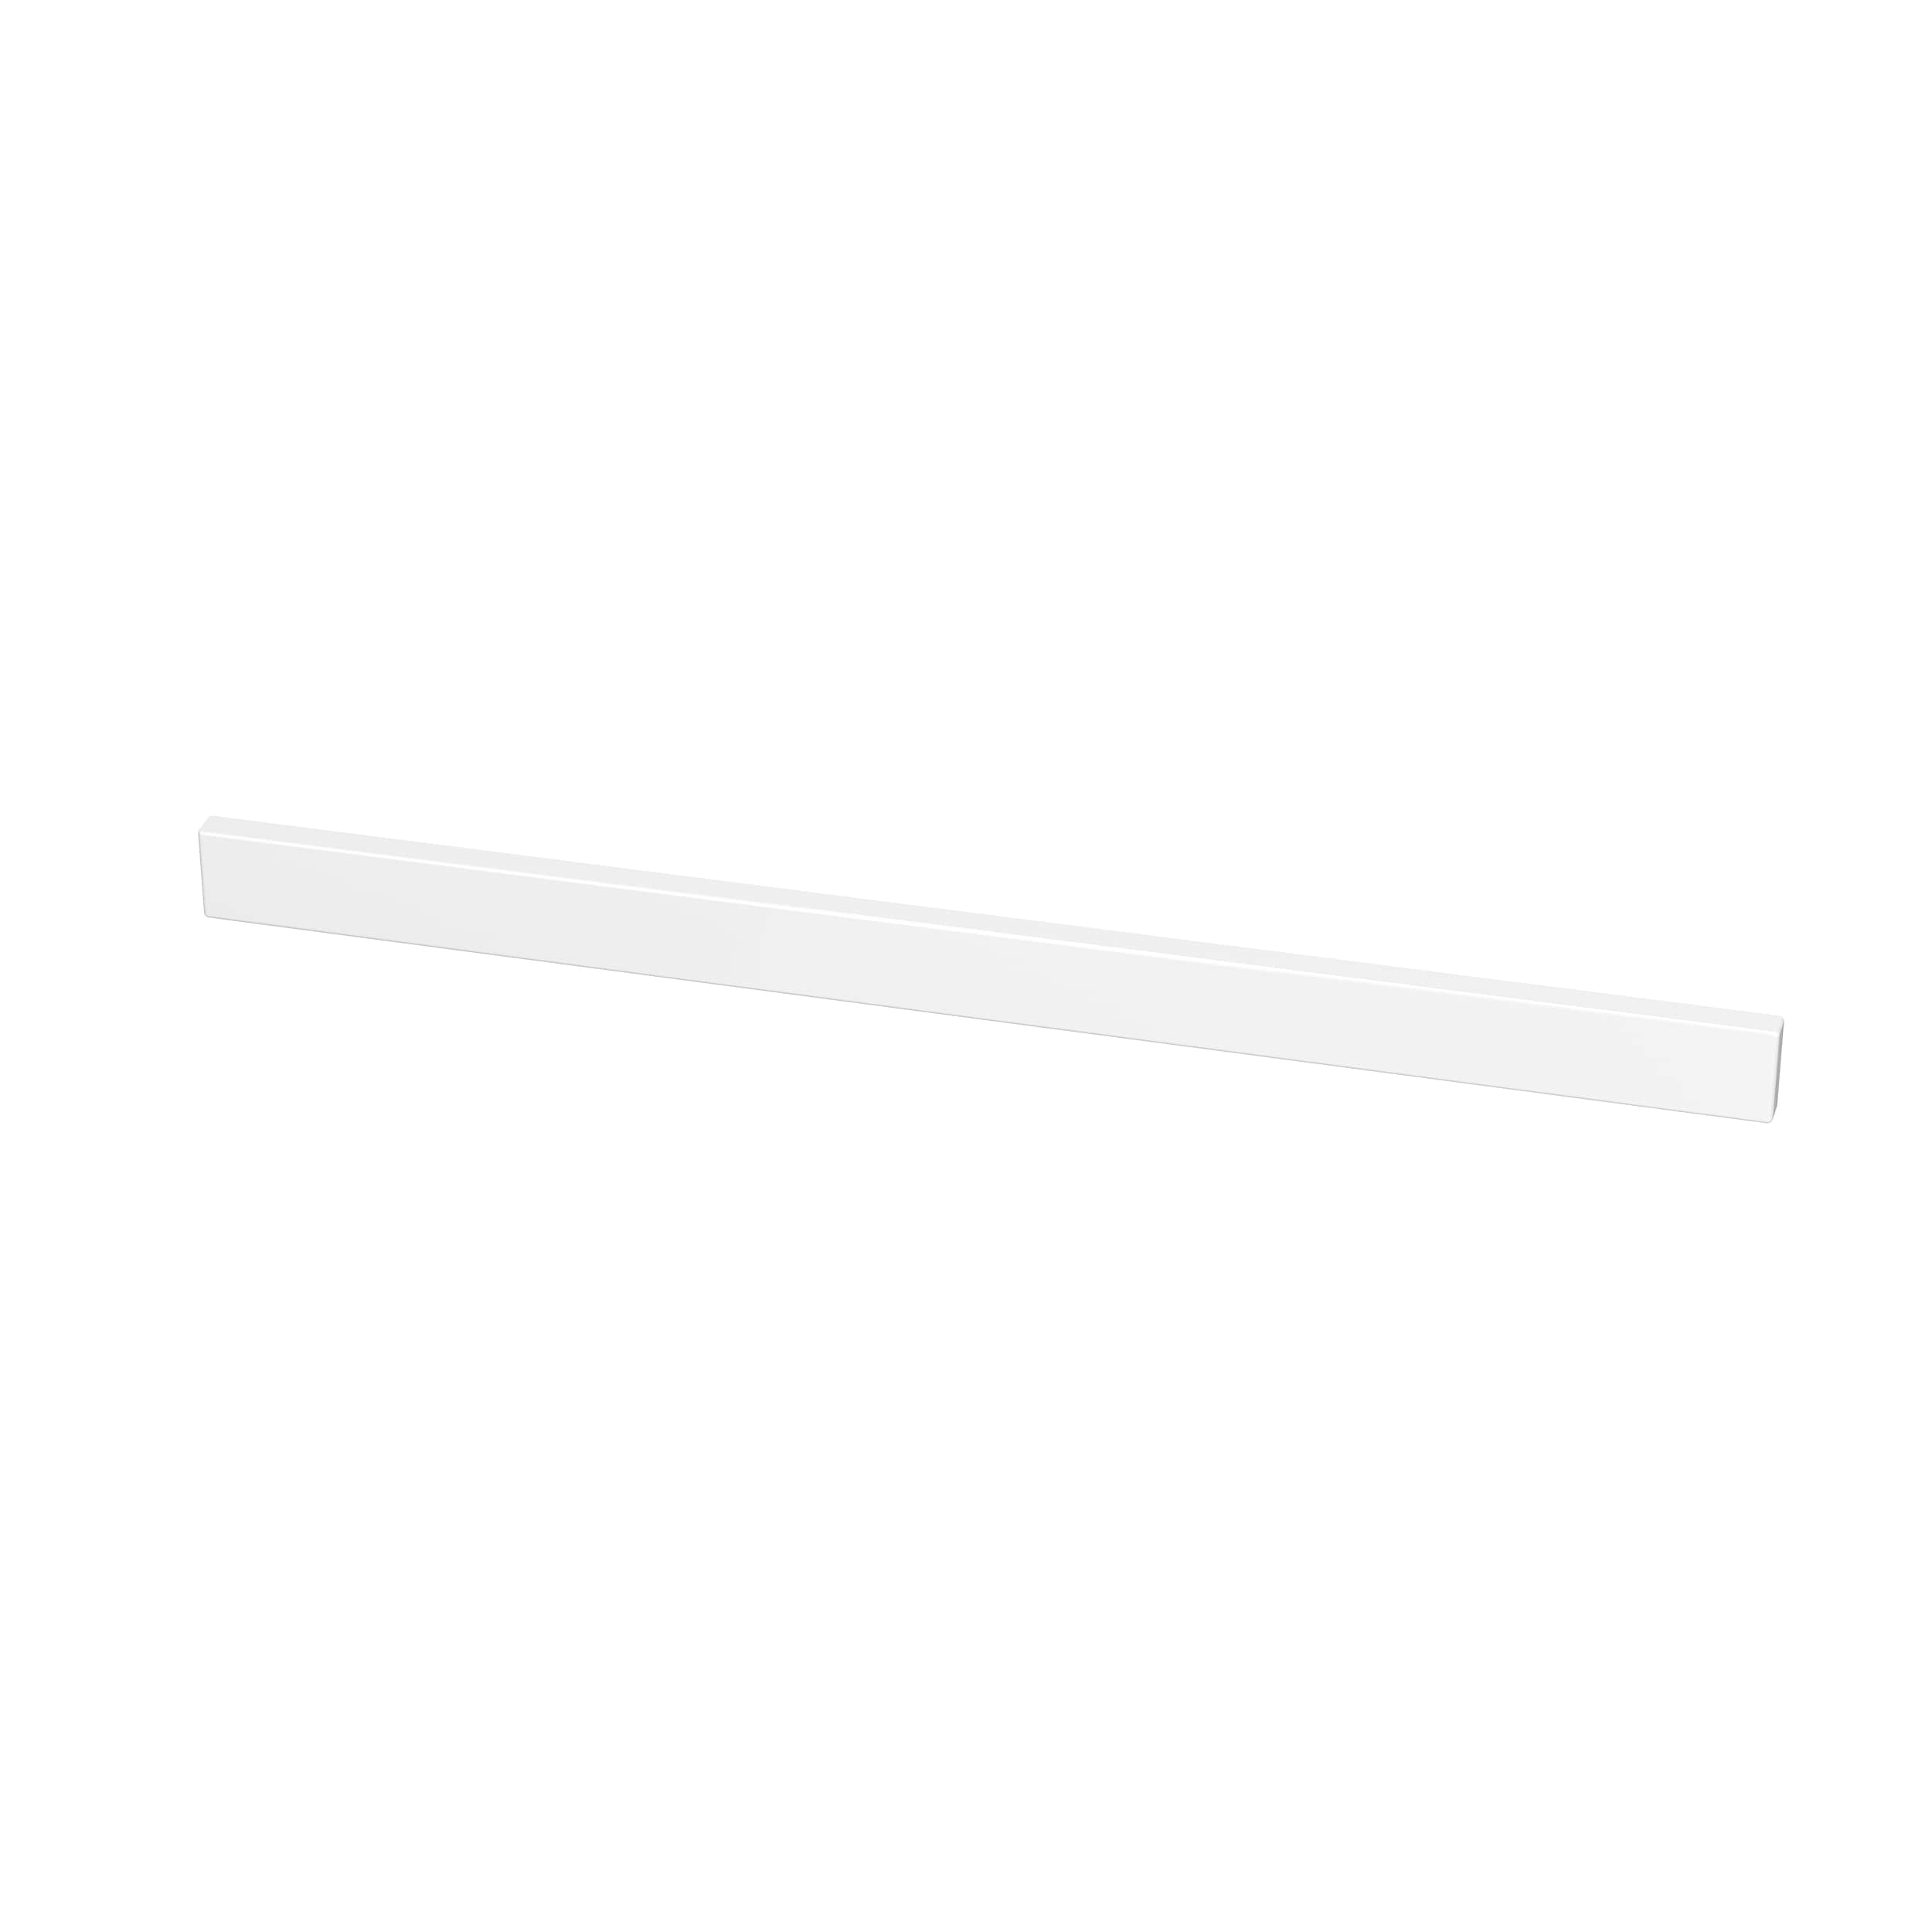 Cultured Marble Vanity Tops 2.37-in H x 37-in L White Cultured Marble Bathroom Backsplash | - Project Source LBS37-3